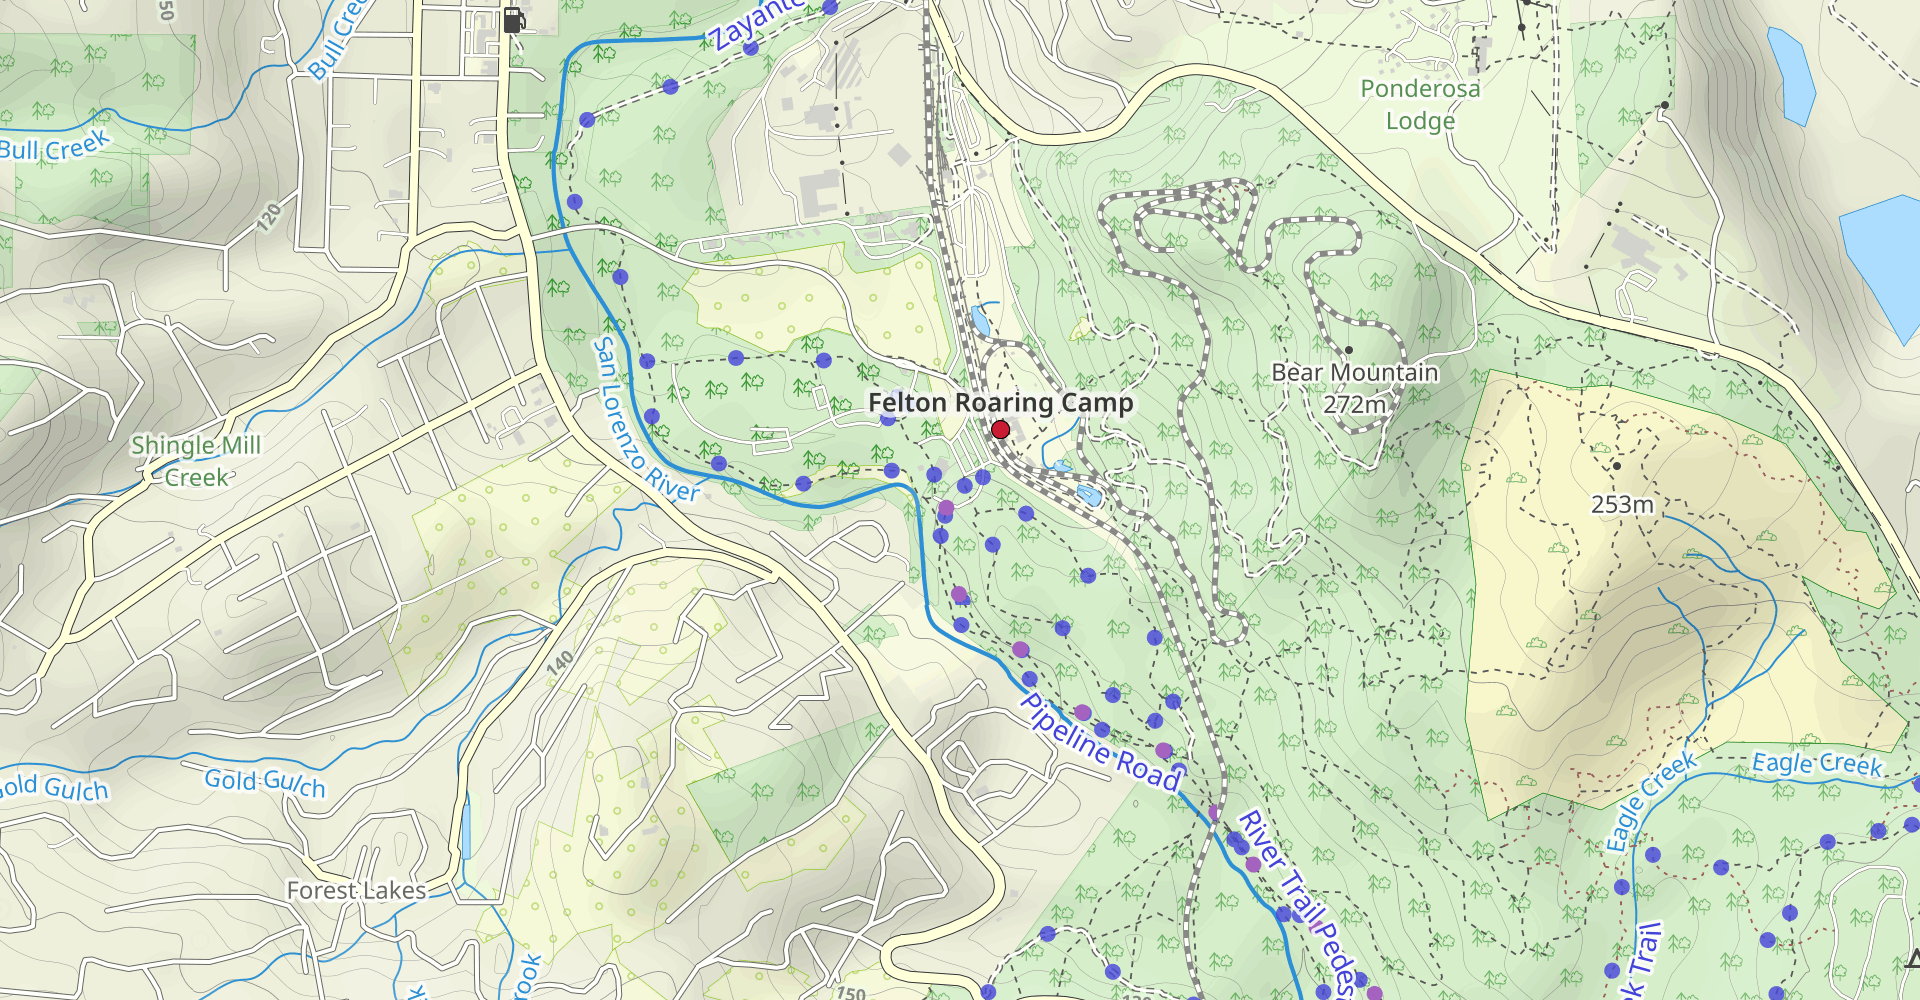 River Trail, Eagle Creek, and Rincon Road Loop